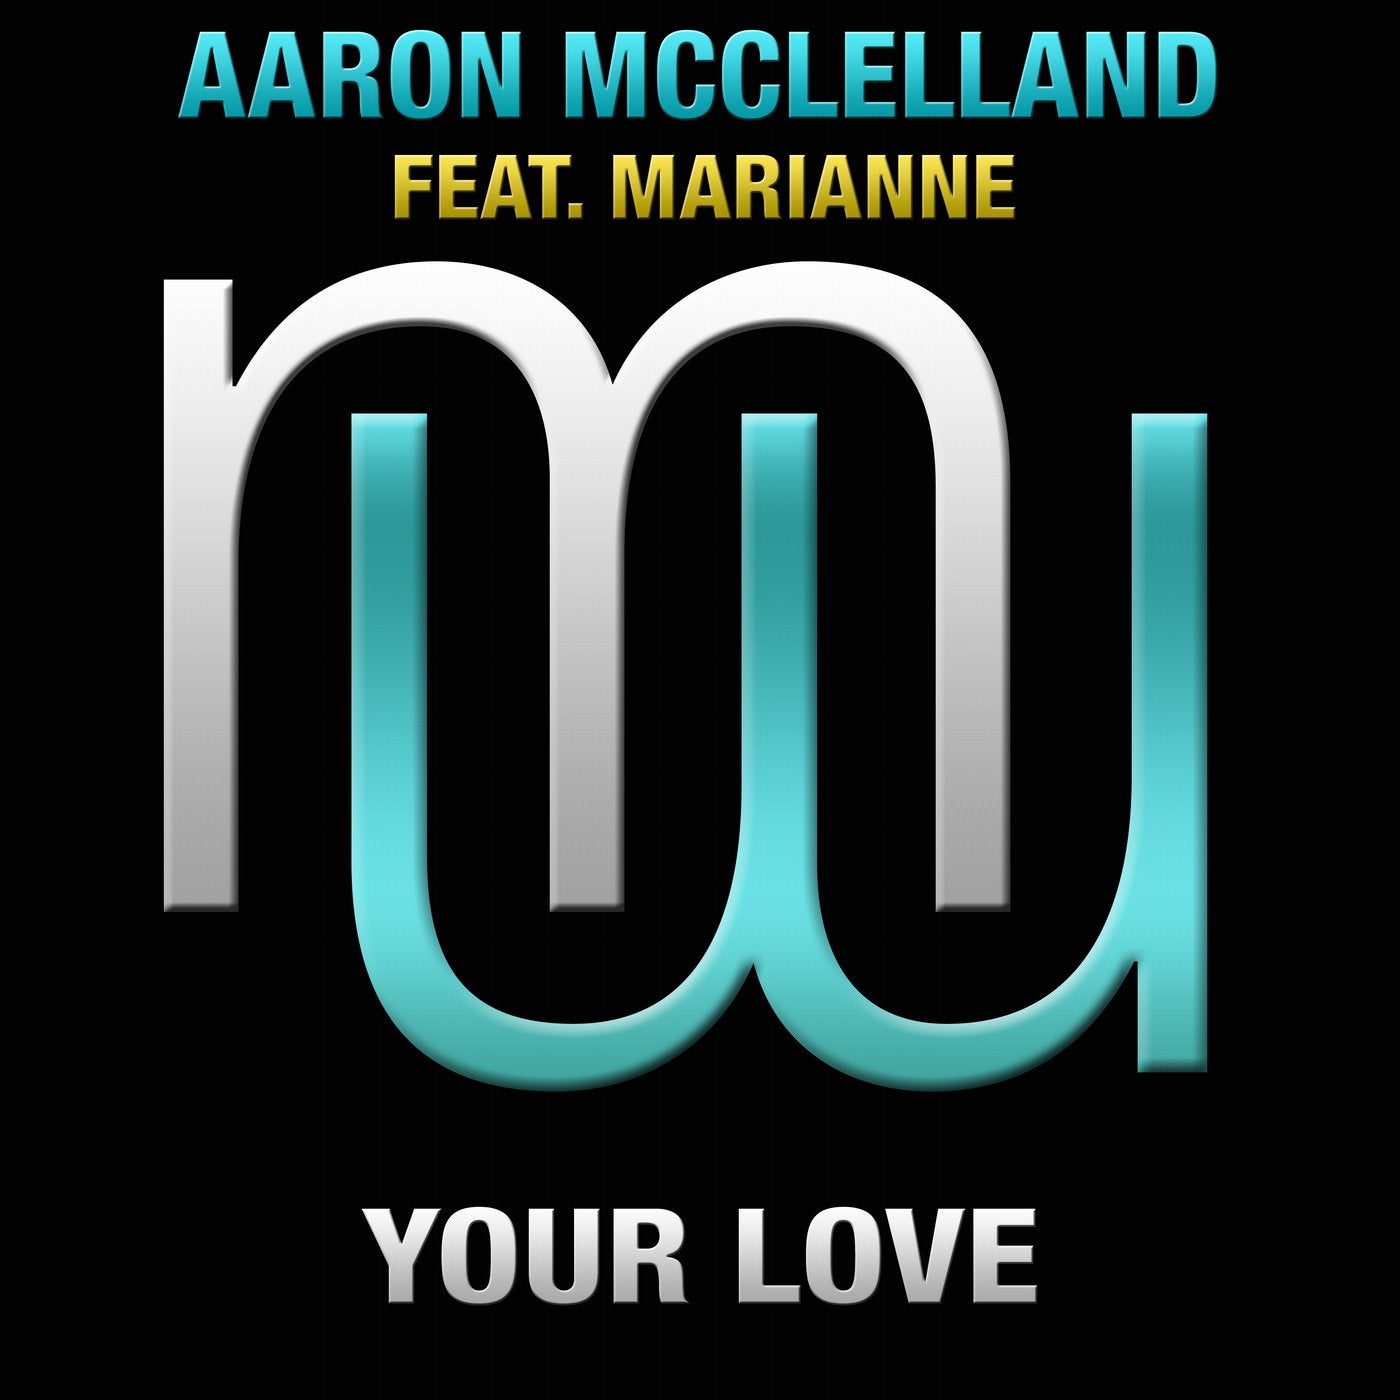 Aaron McClelland Feat Marianne - Your Love